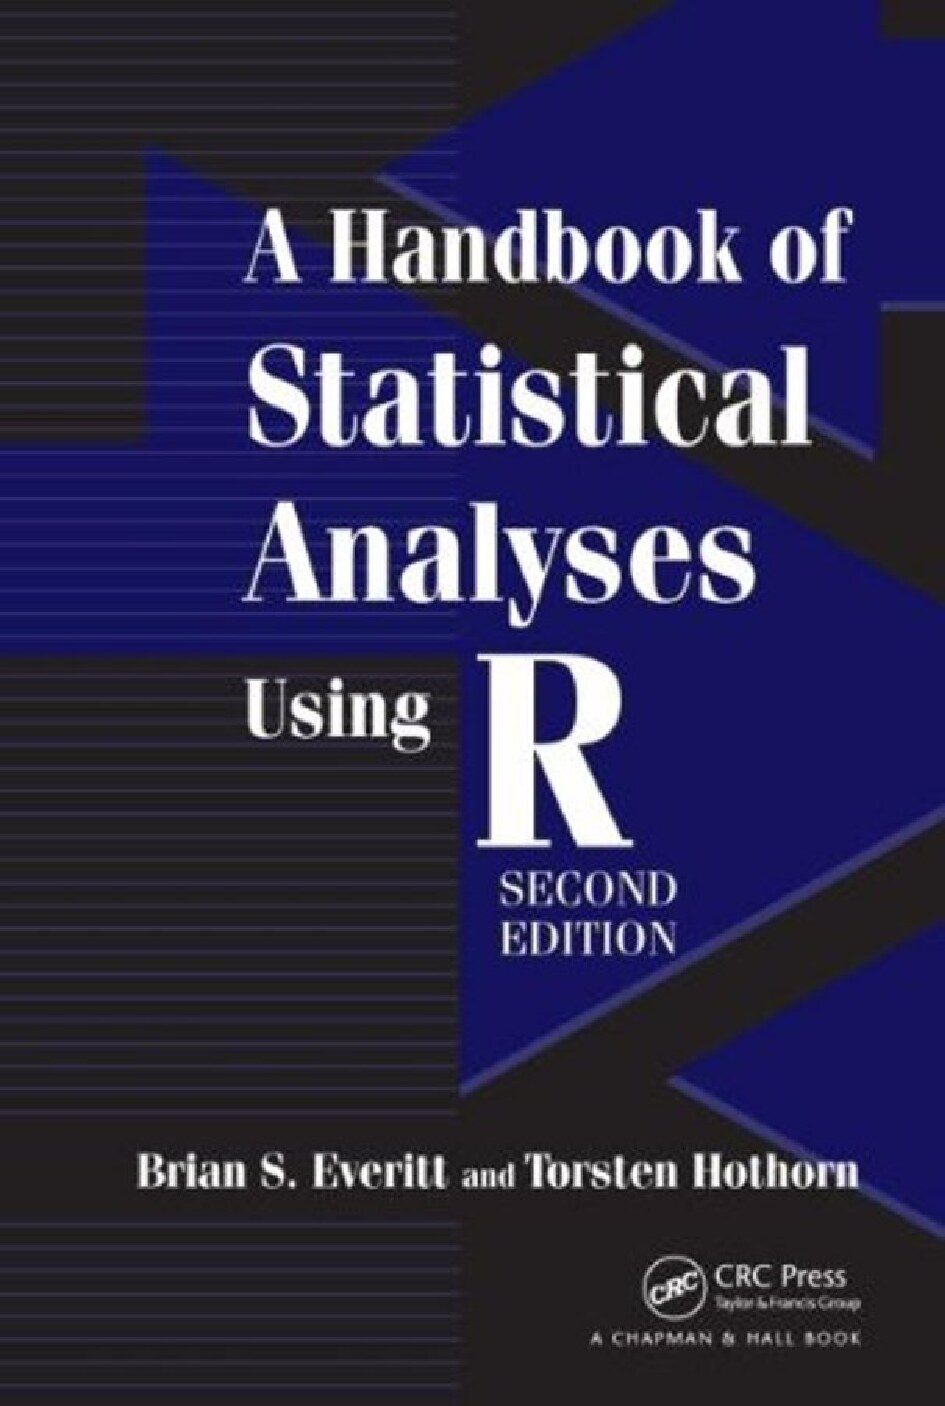 A Handbook of Statistical Analyses using R, 2nd ed